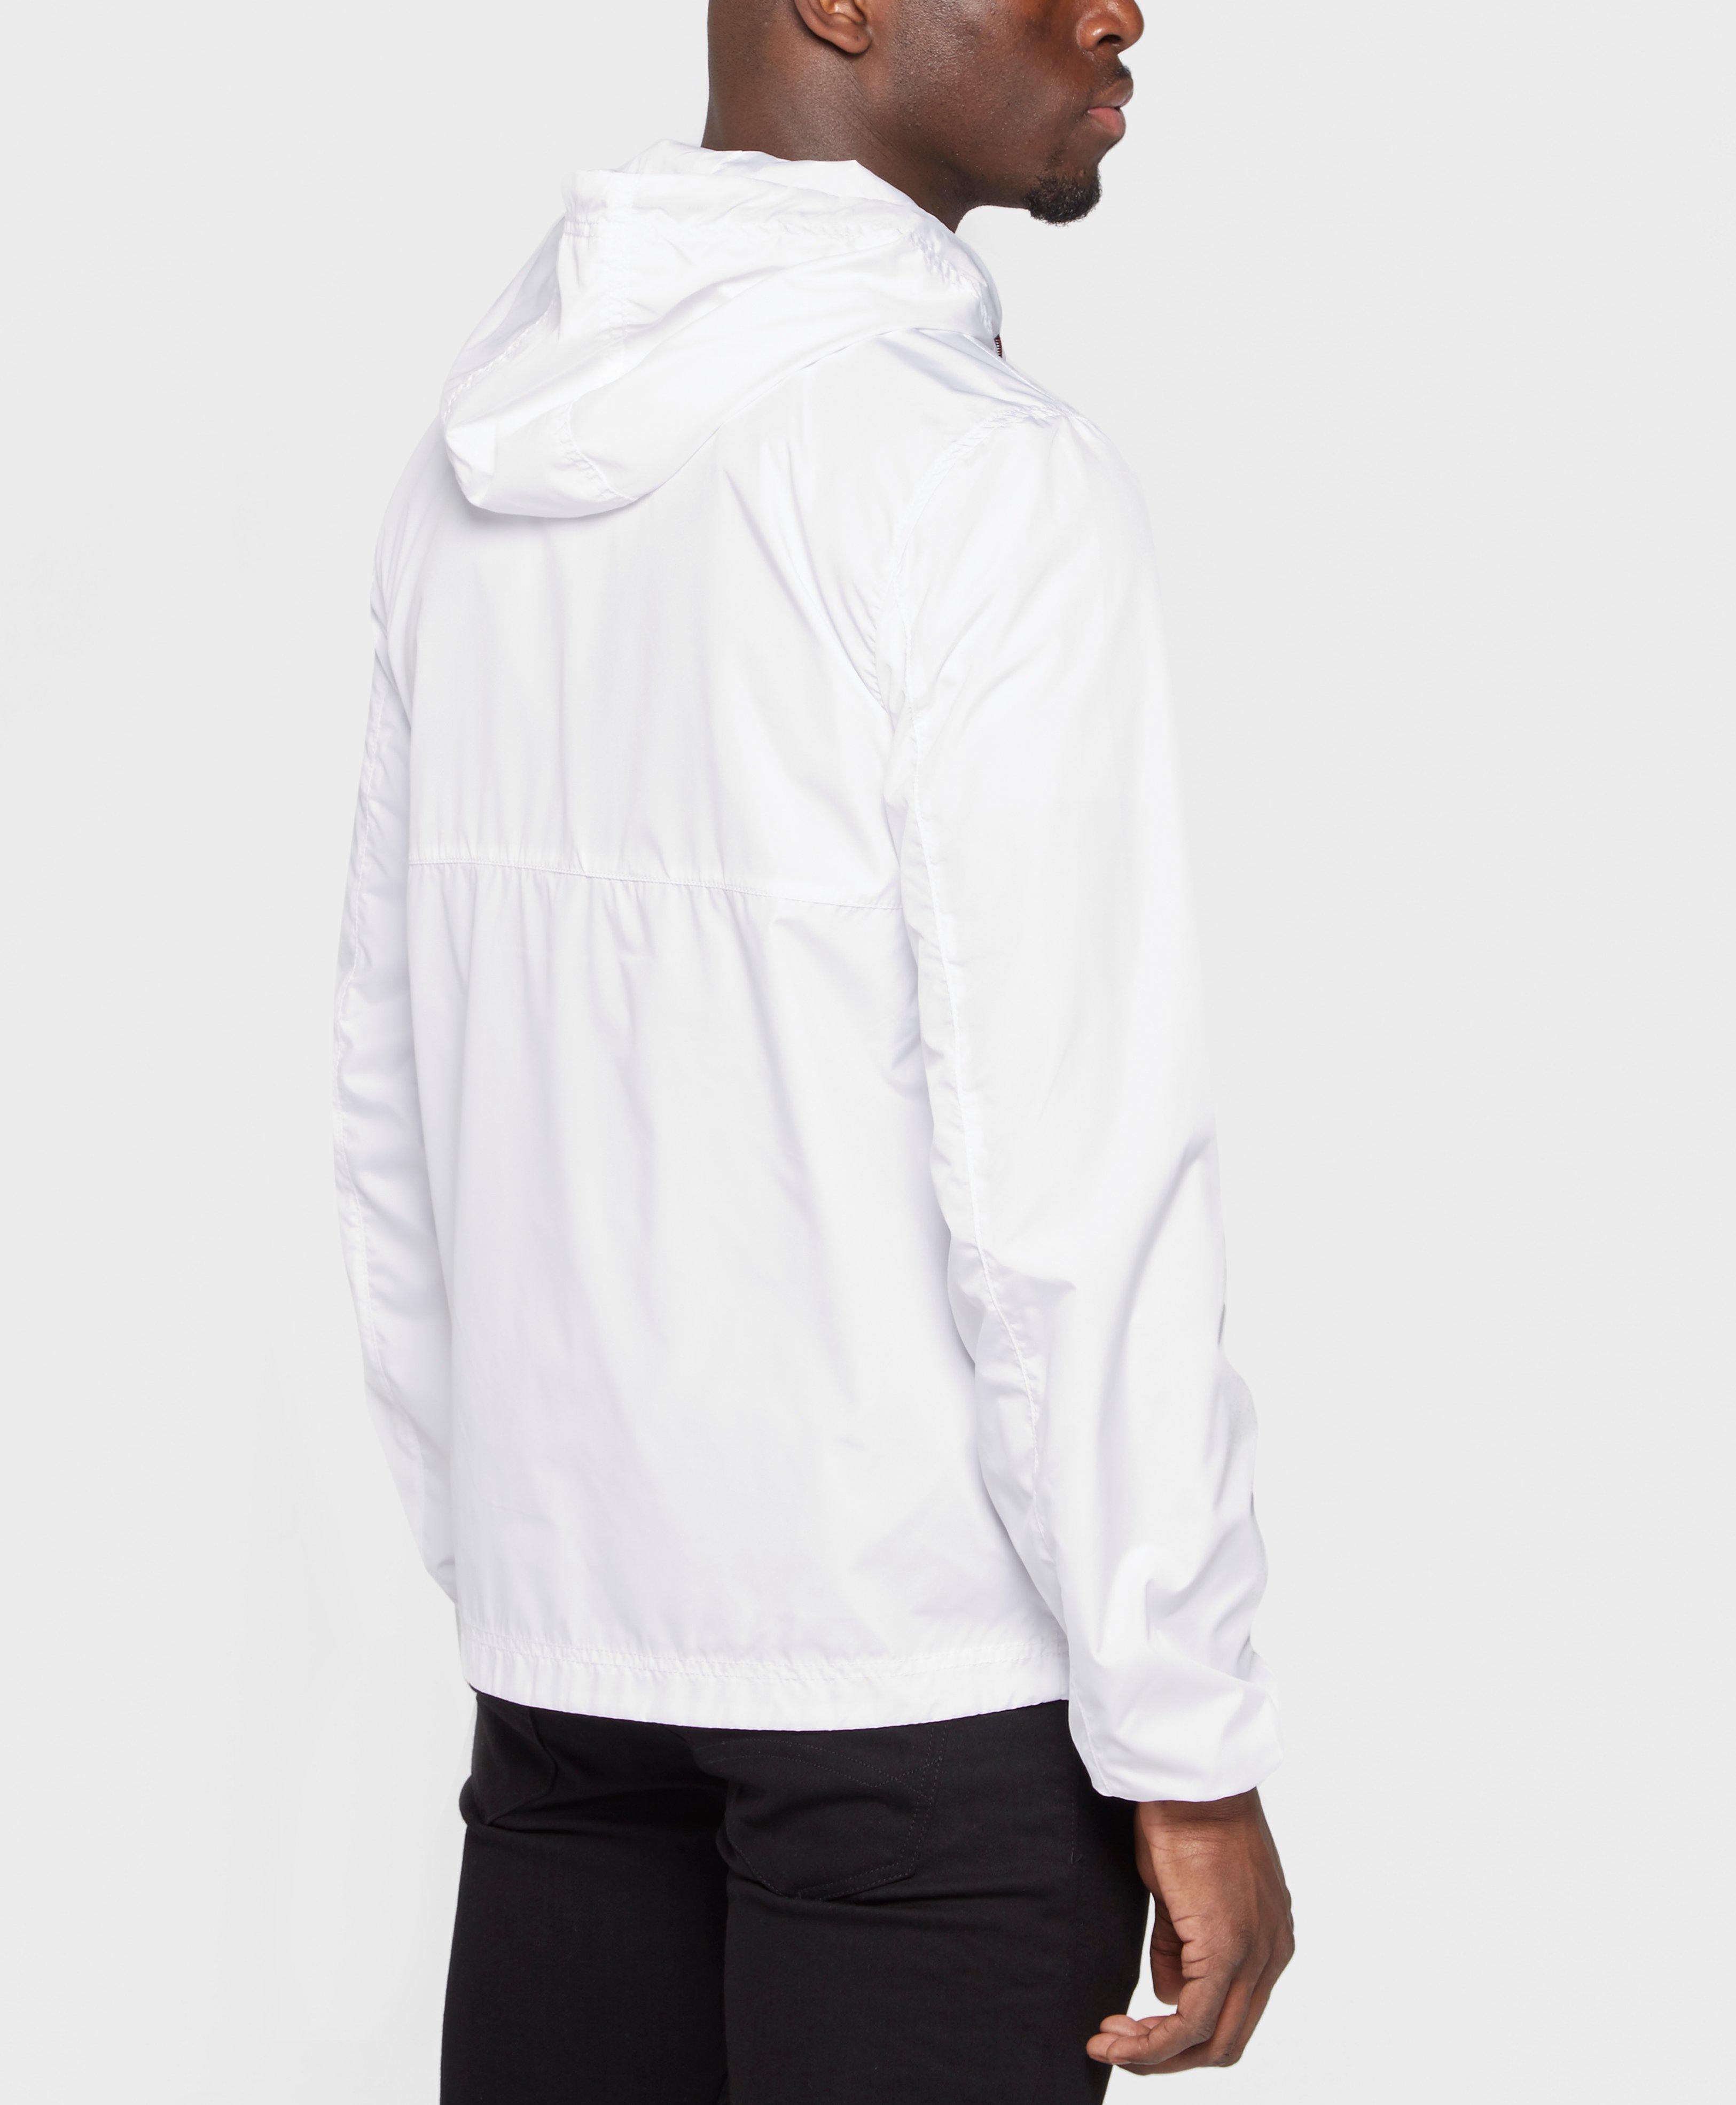 Tommy Hilfiger Overhead Lightweight Anorak in White for Men - Lyst